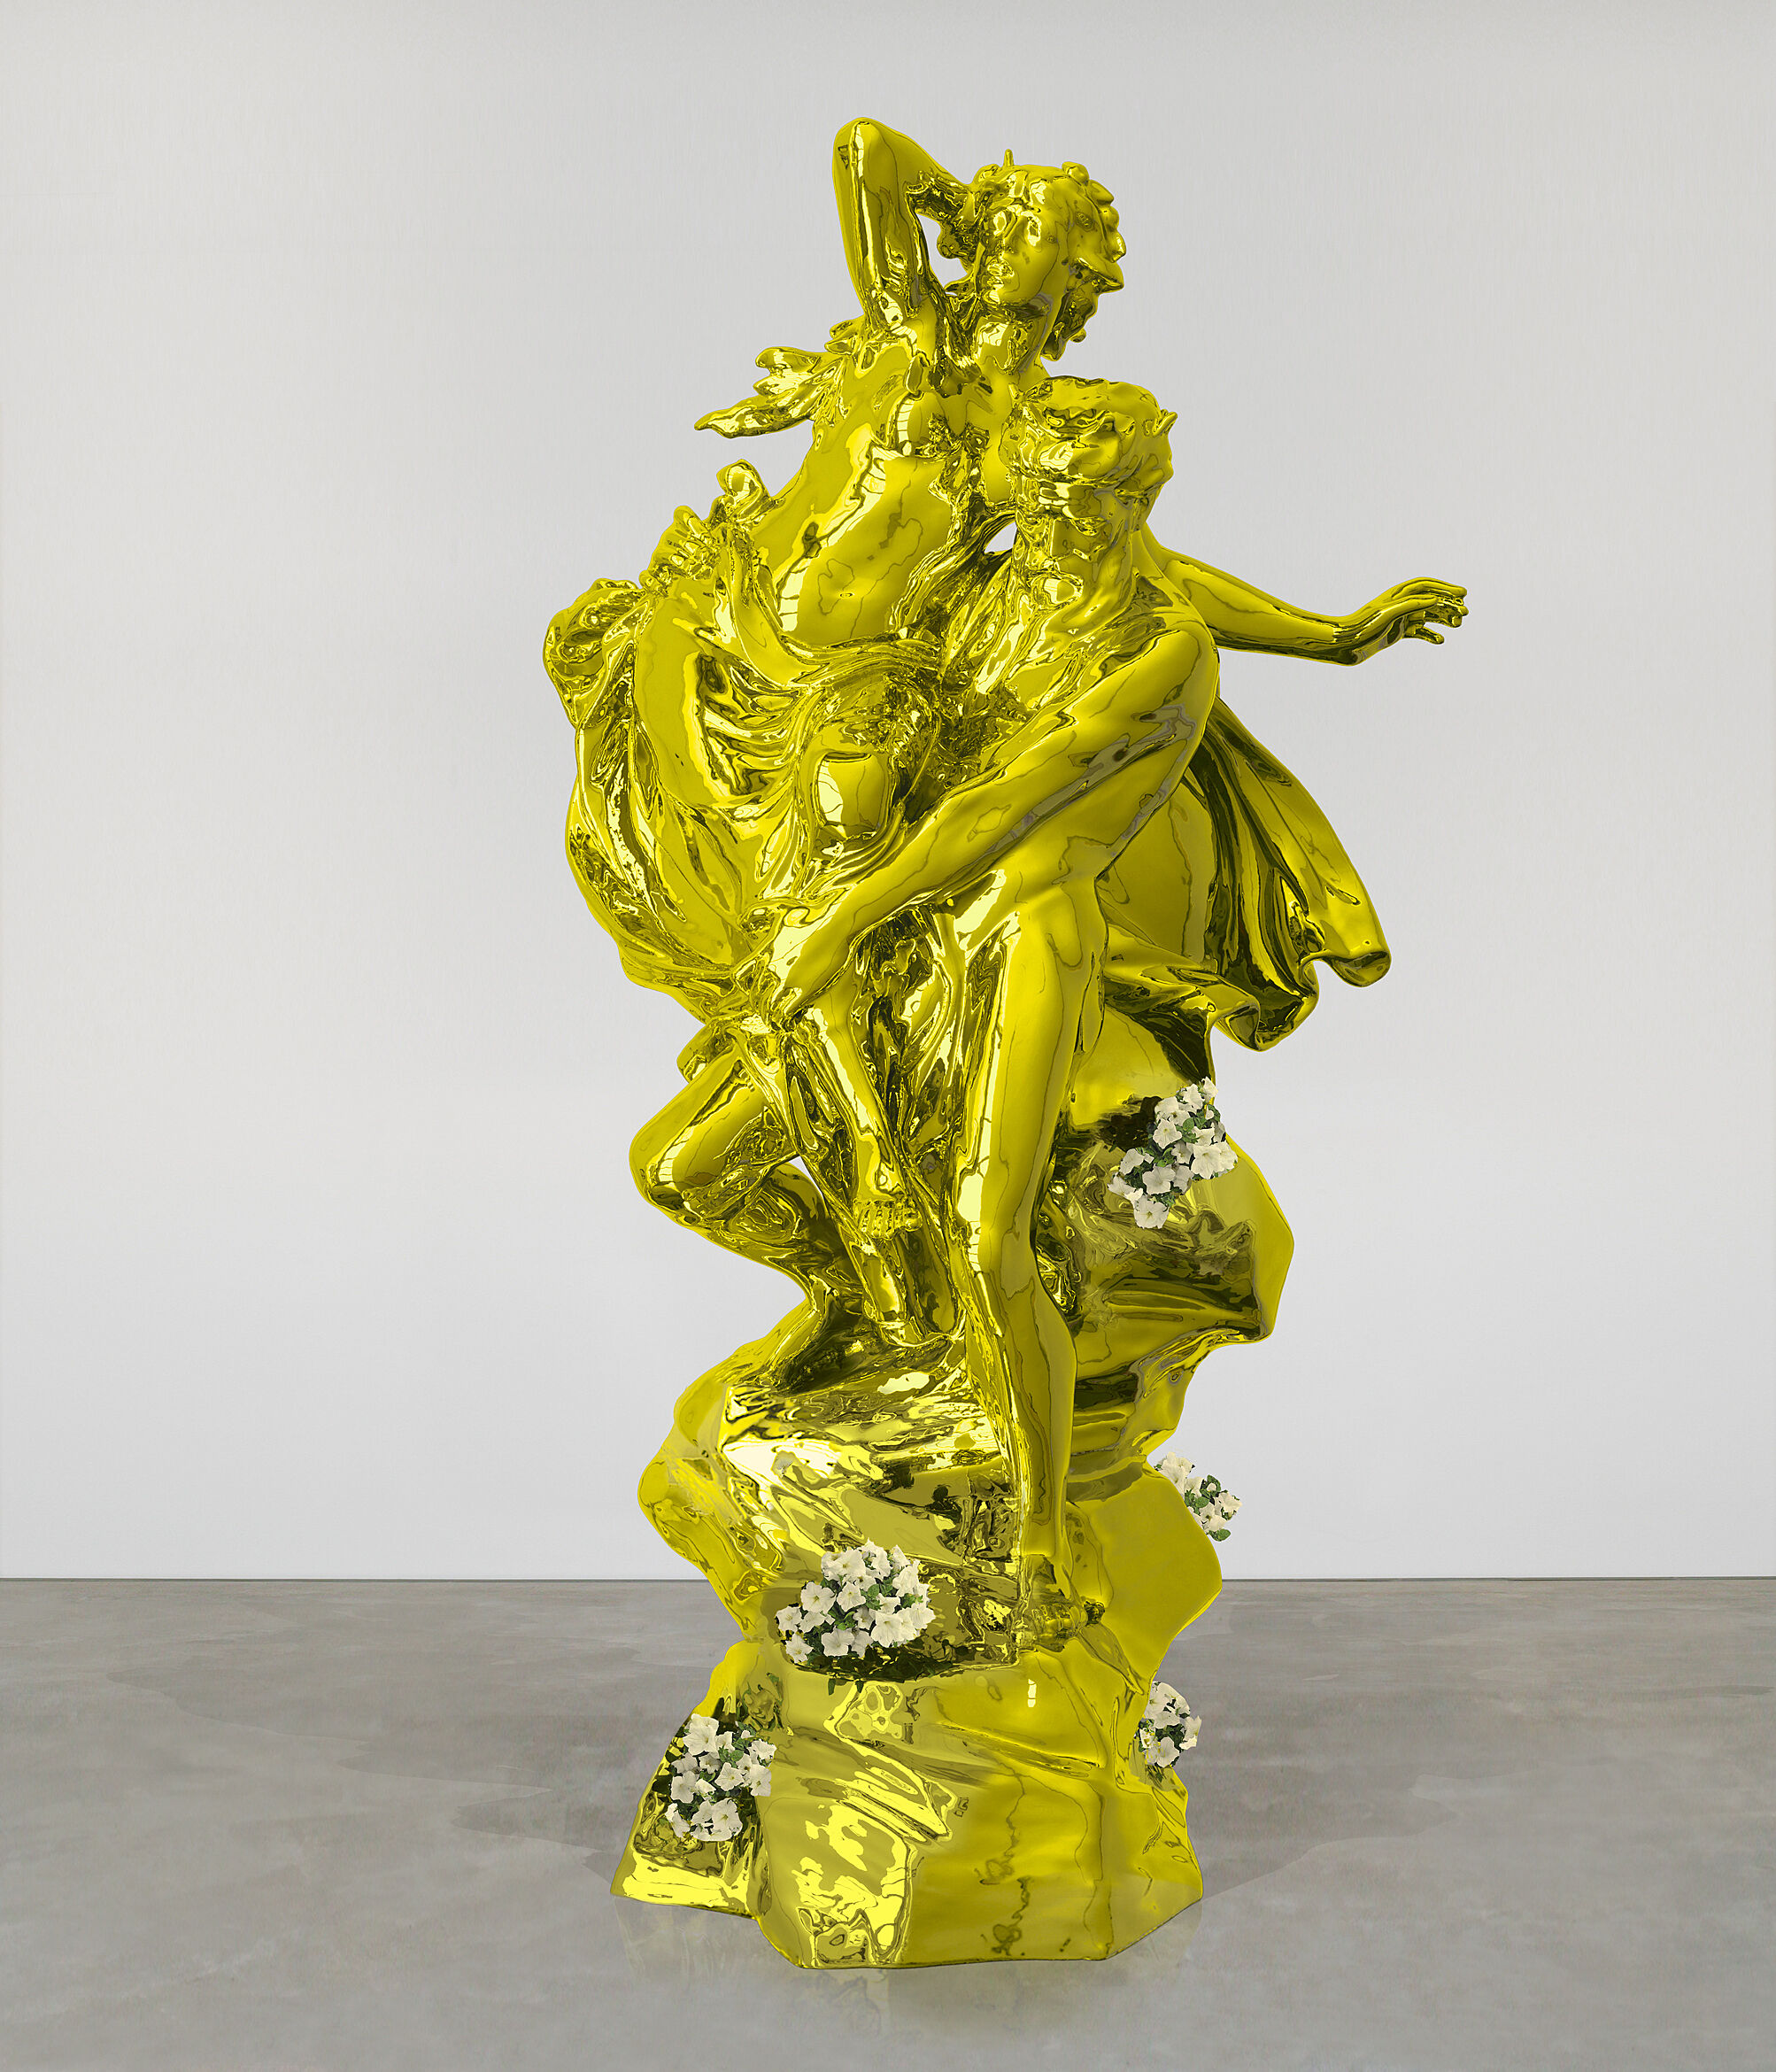 A yellow-golden statue of two figures, one holding the other, with live plants scattered around the base.